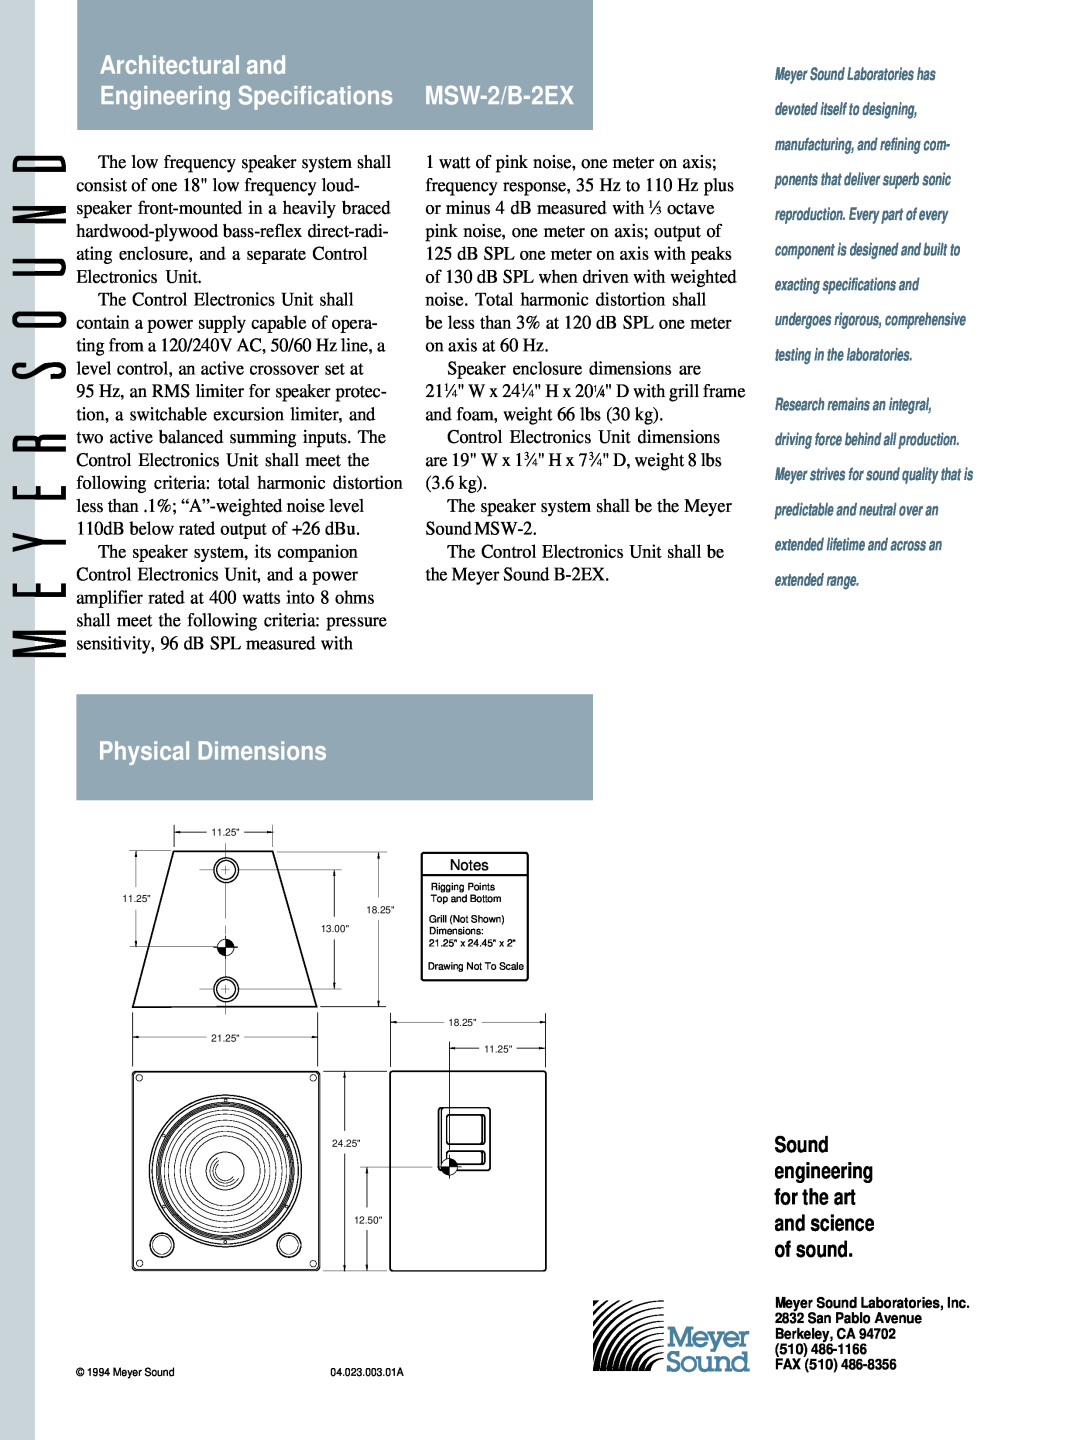 Meyer Sound manual Architectural and, Engineering Specifications MSW-2/B-2EX, Physical Dimensions 